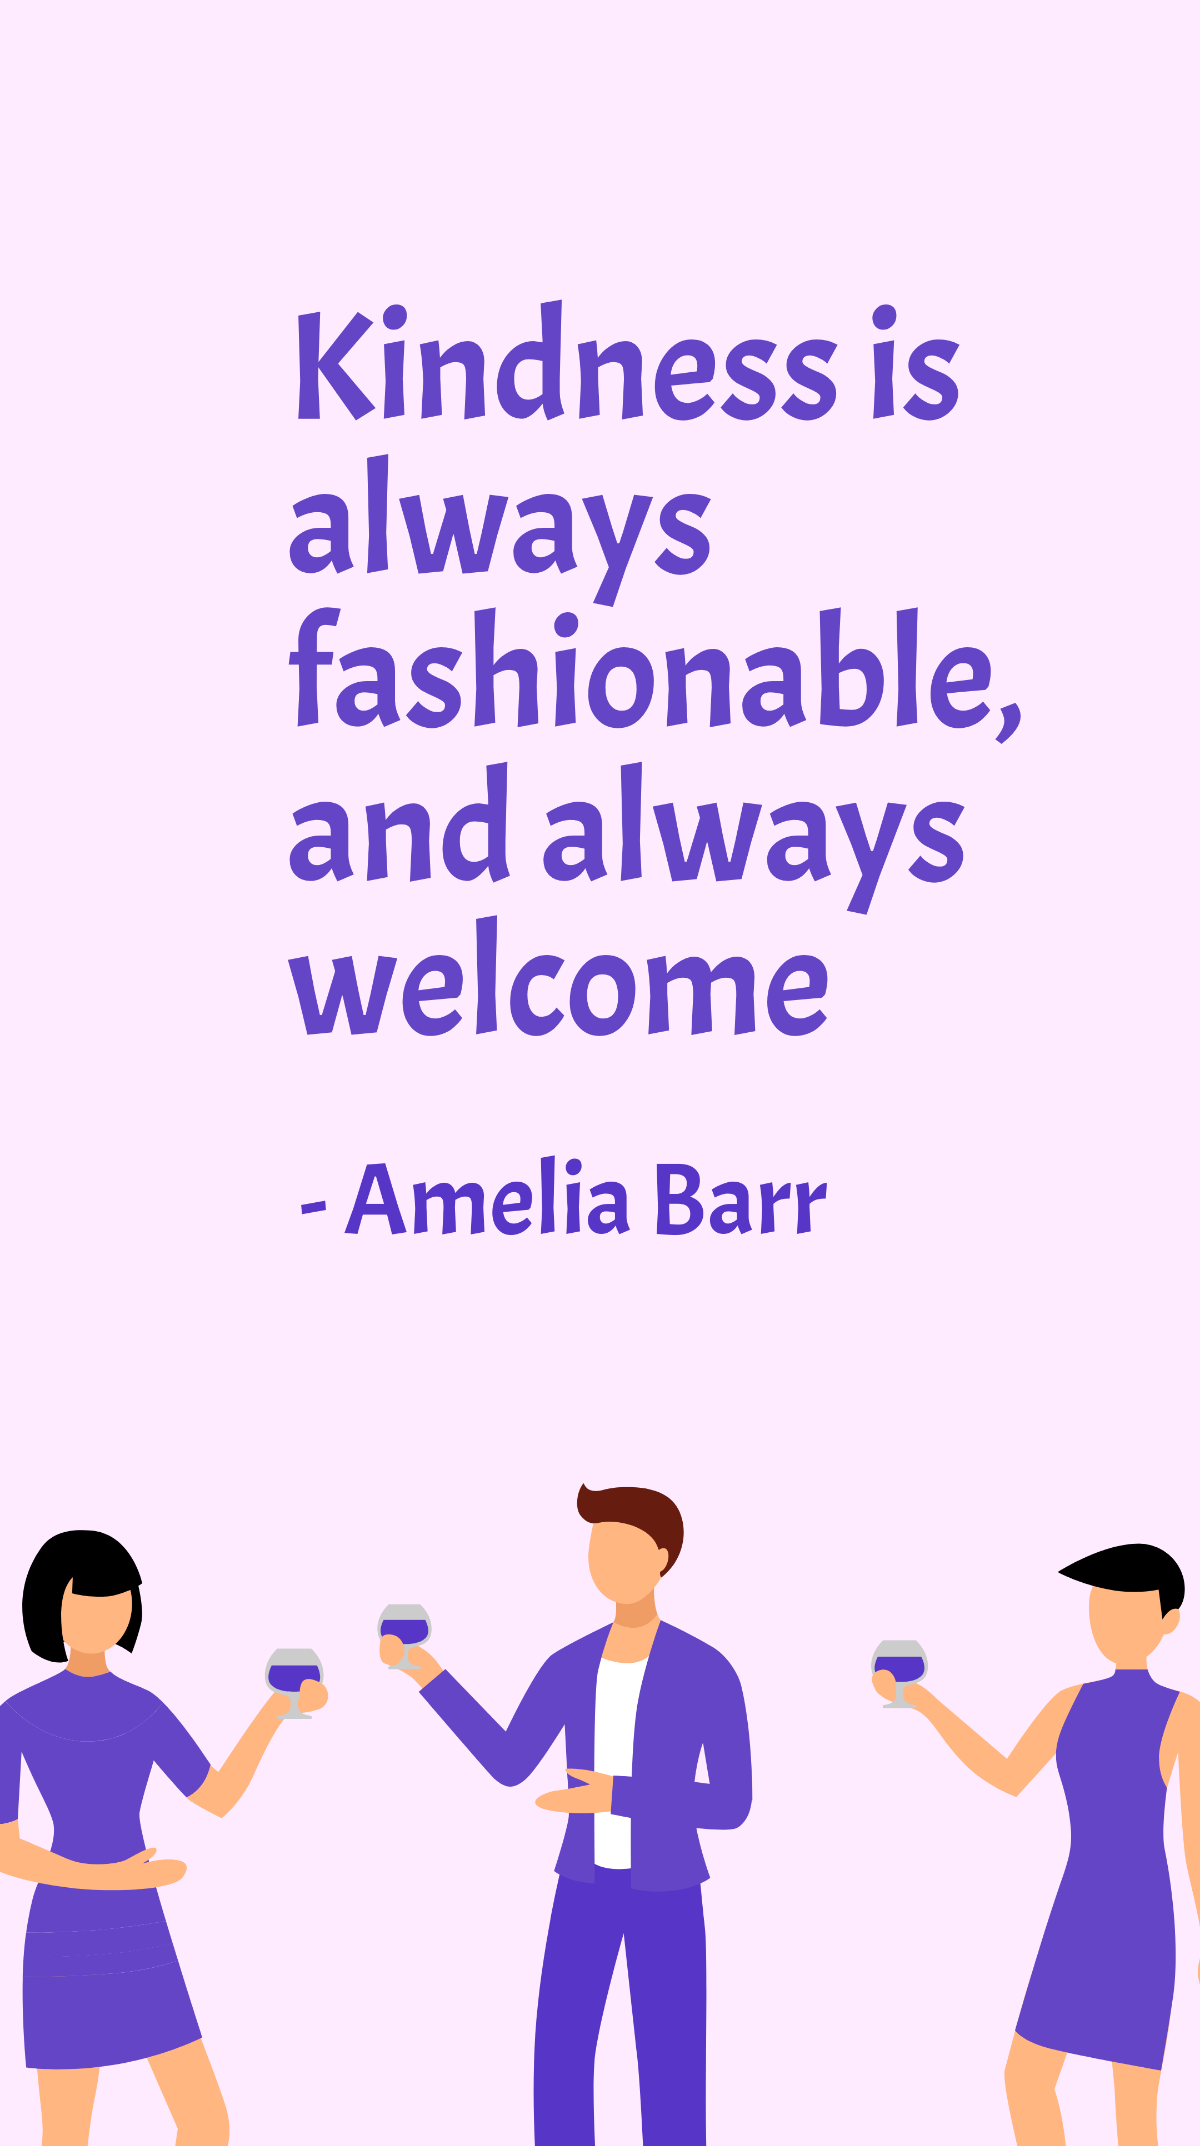 Free Amelia Barr - Kindness is always fashionable, and always welcome Template